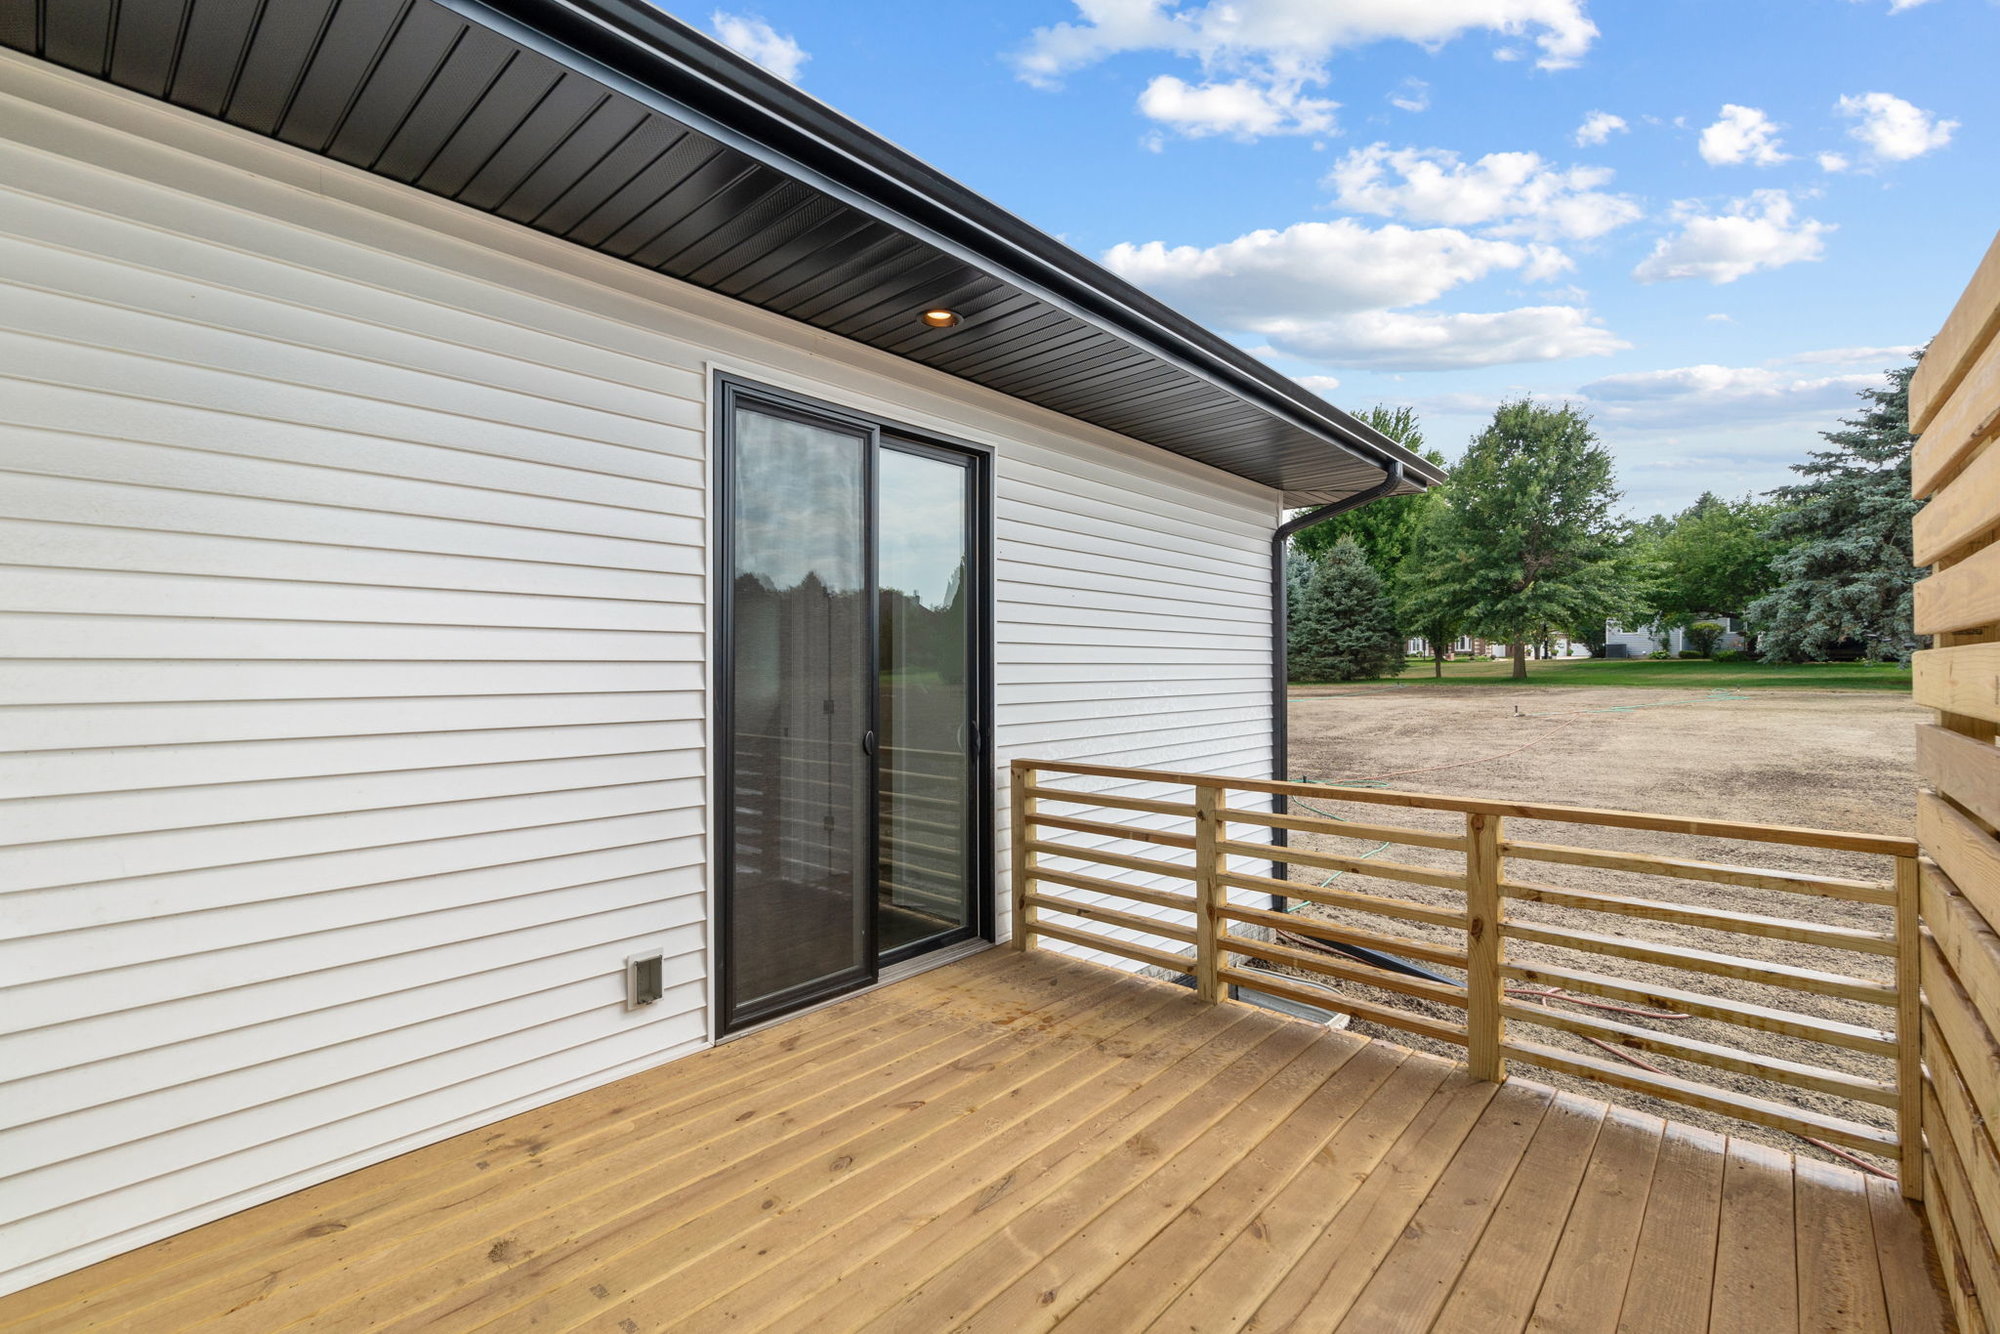 Modern, Sleek & Spacious. Everything You Wan is in this New Construction LGC Home in Cedar Falls Iowa